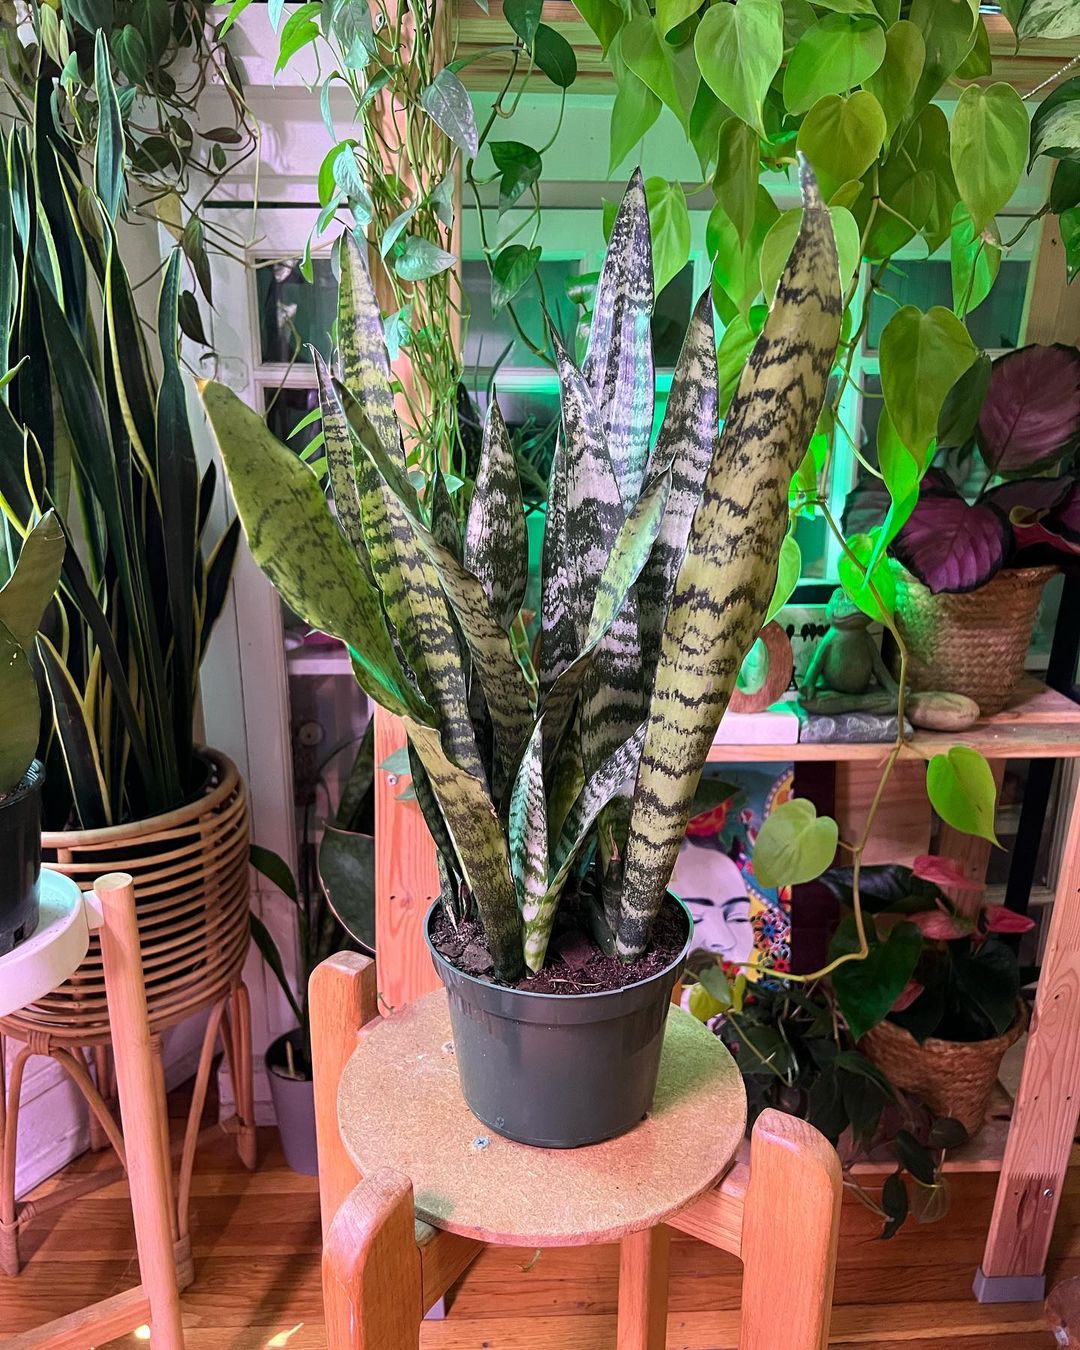 A potted snake plant on a wooden chair. Snake plants thrive in various light conditions.